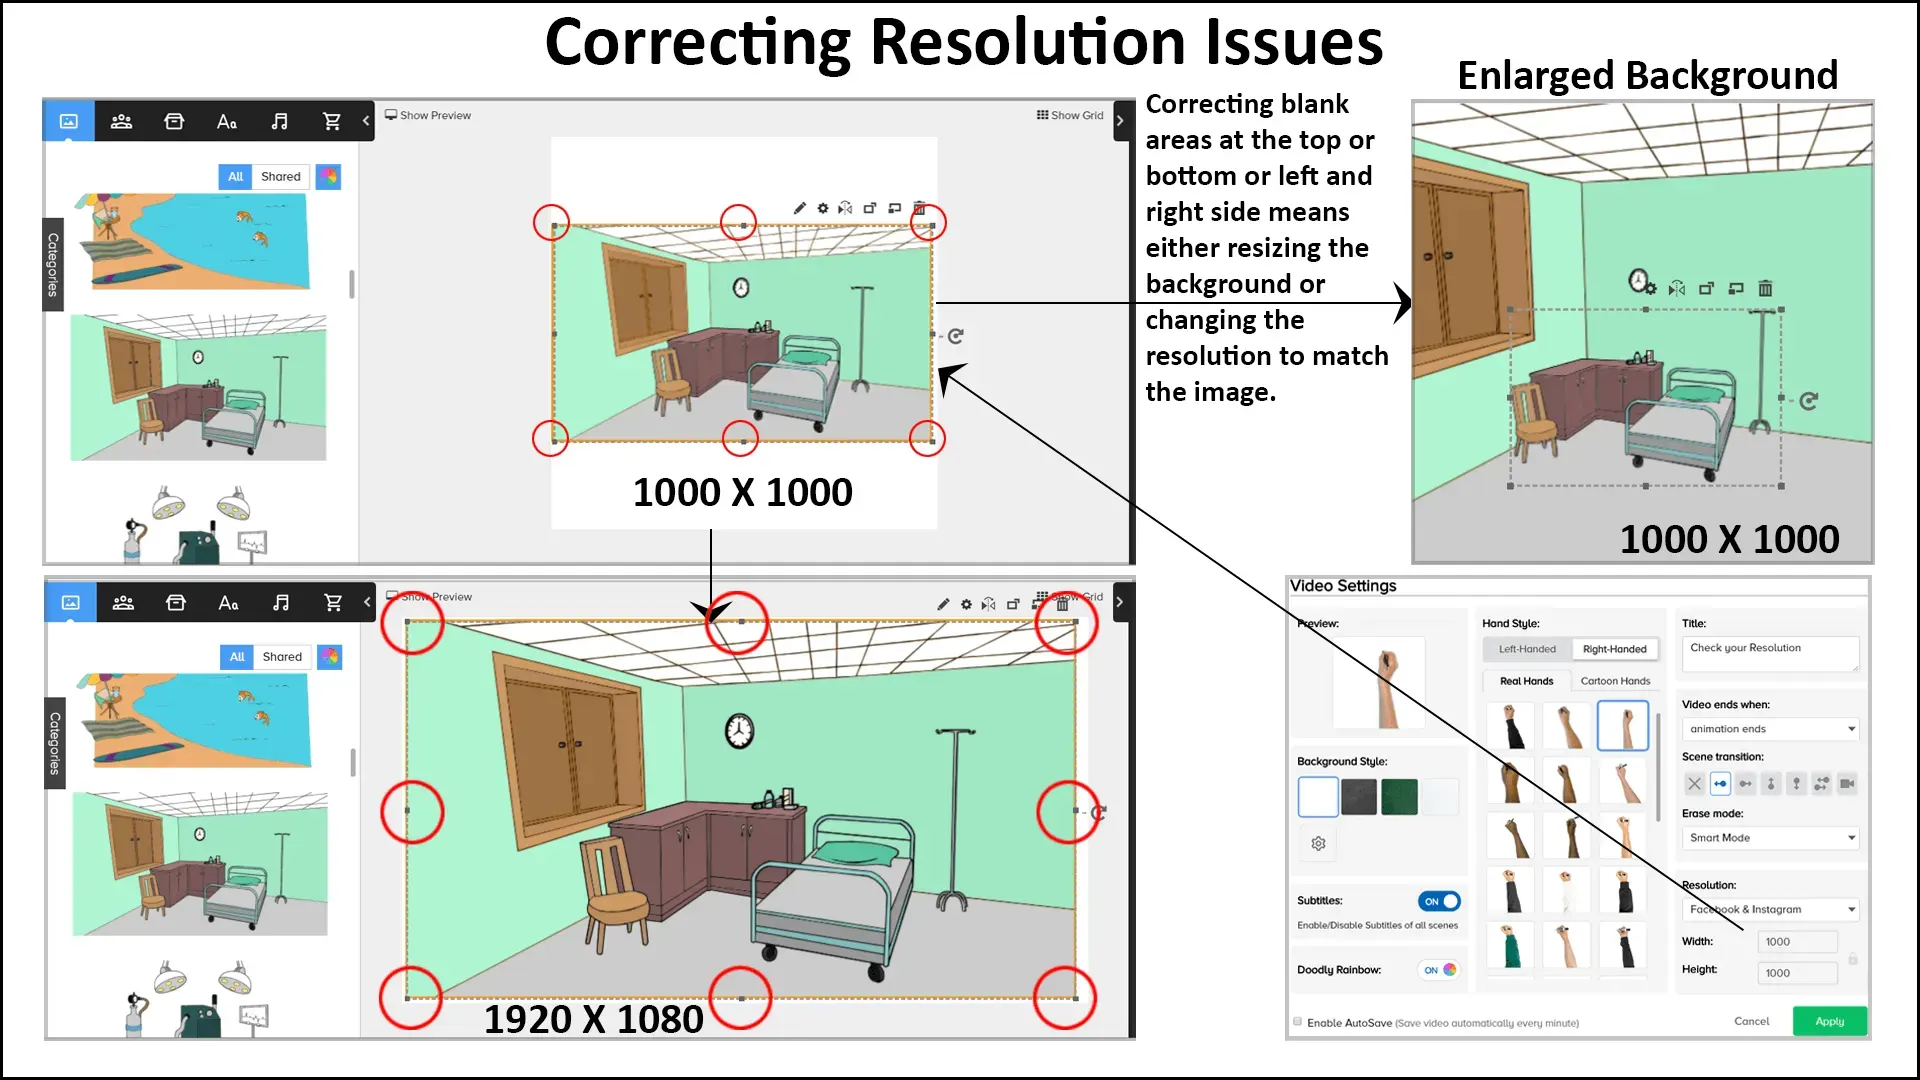 Showing how to correct resolution issues in Doodly.  Shows images of why a 1920 pixel by 1080 pixel image will not fit into a 1000 pixel by 1000 pixel Facebook canvas and how to correct that by resizing and enlarging the image.